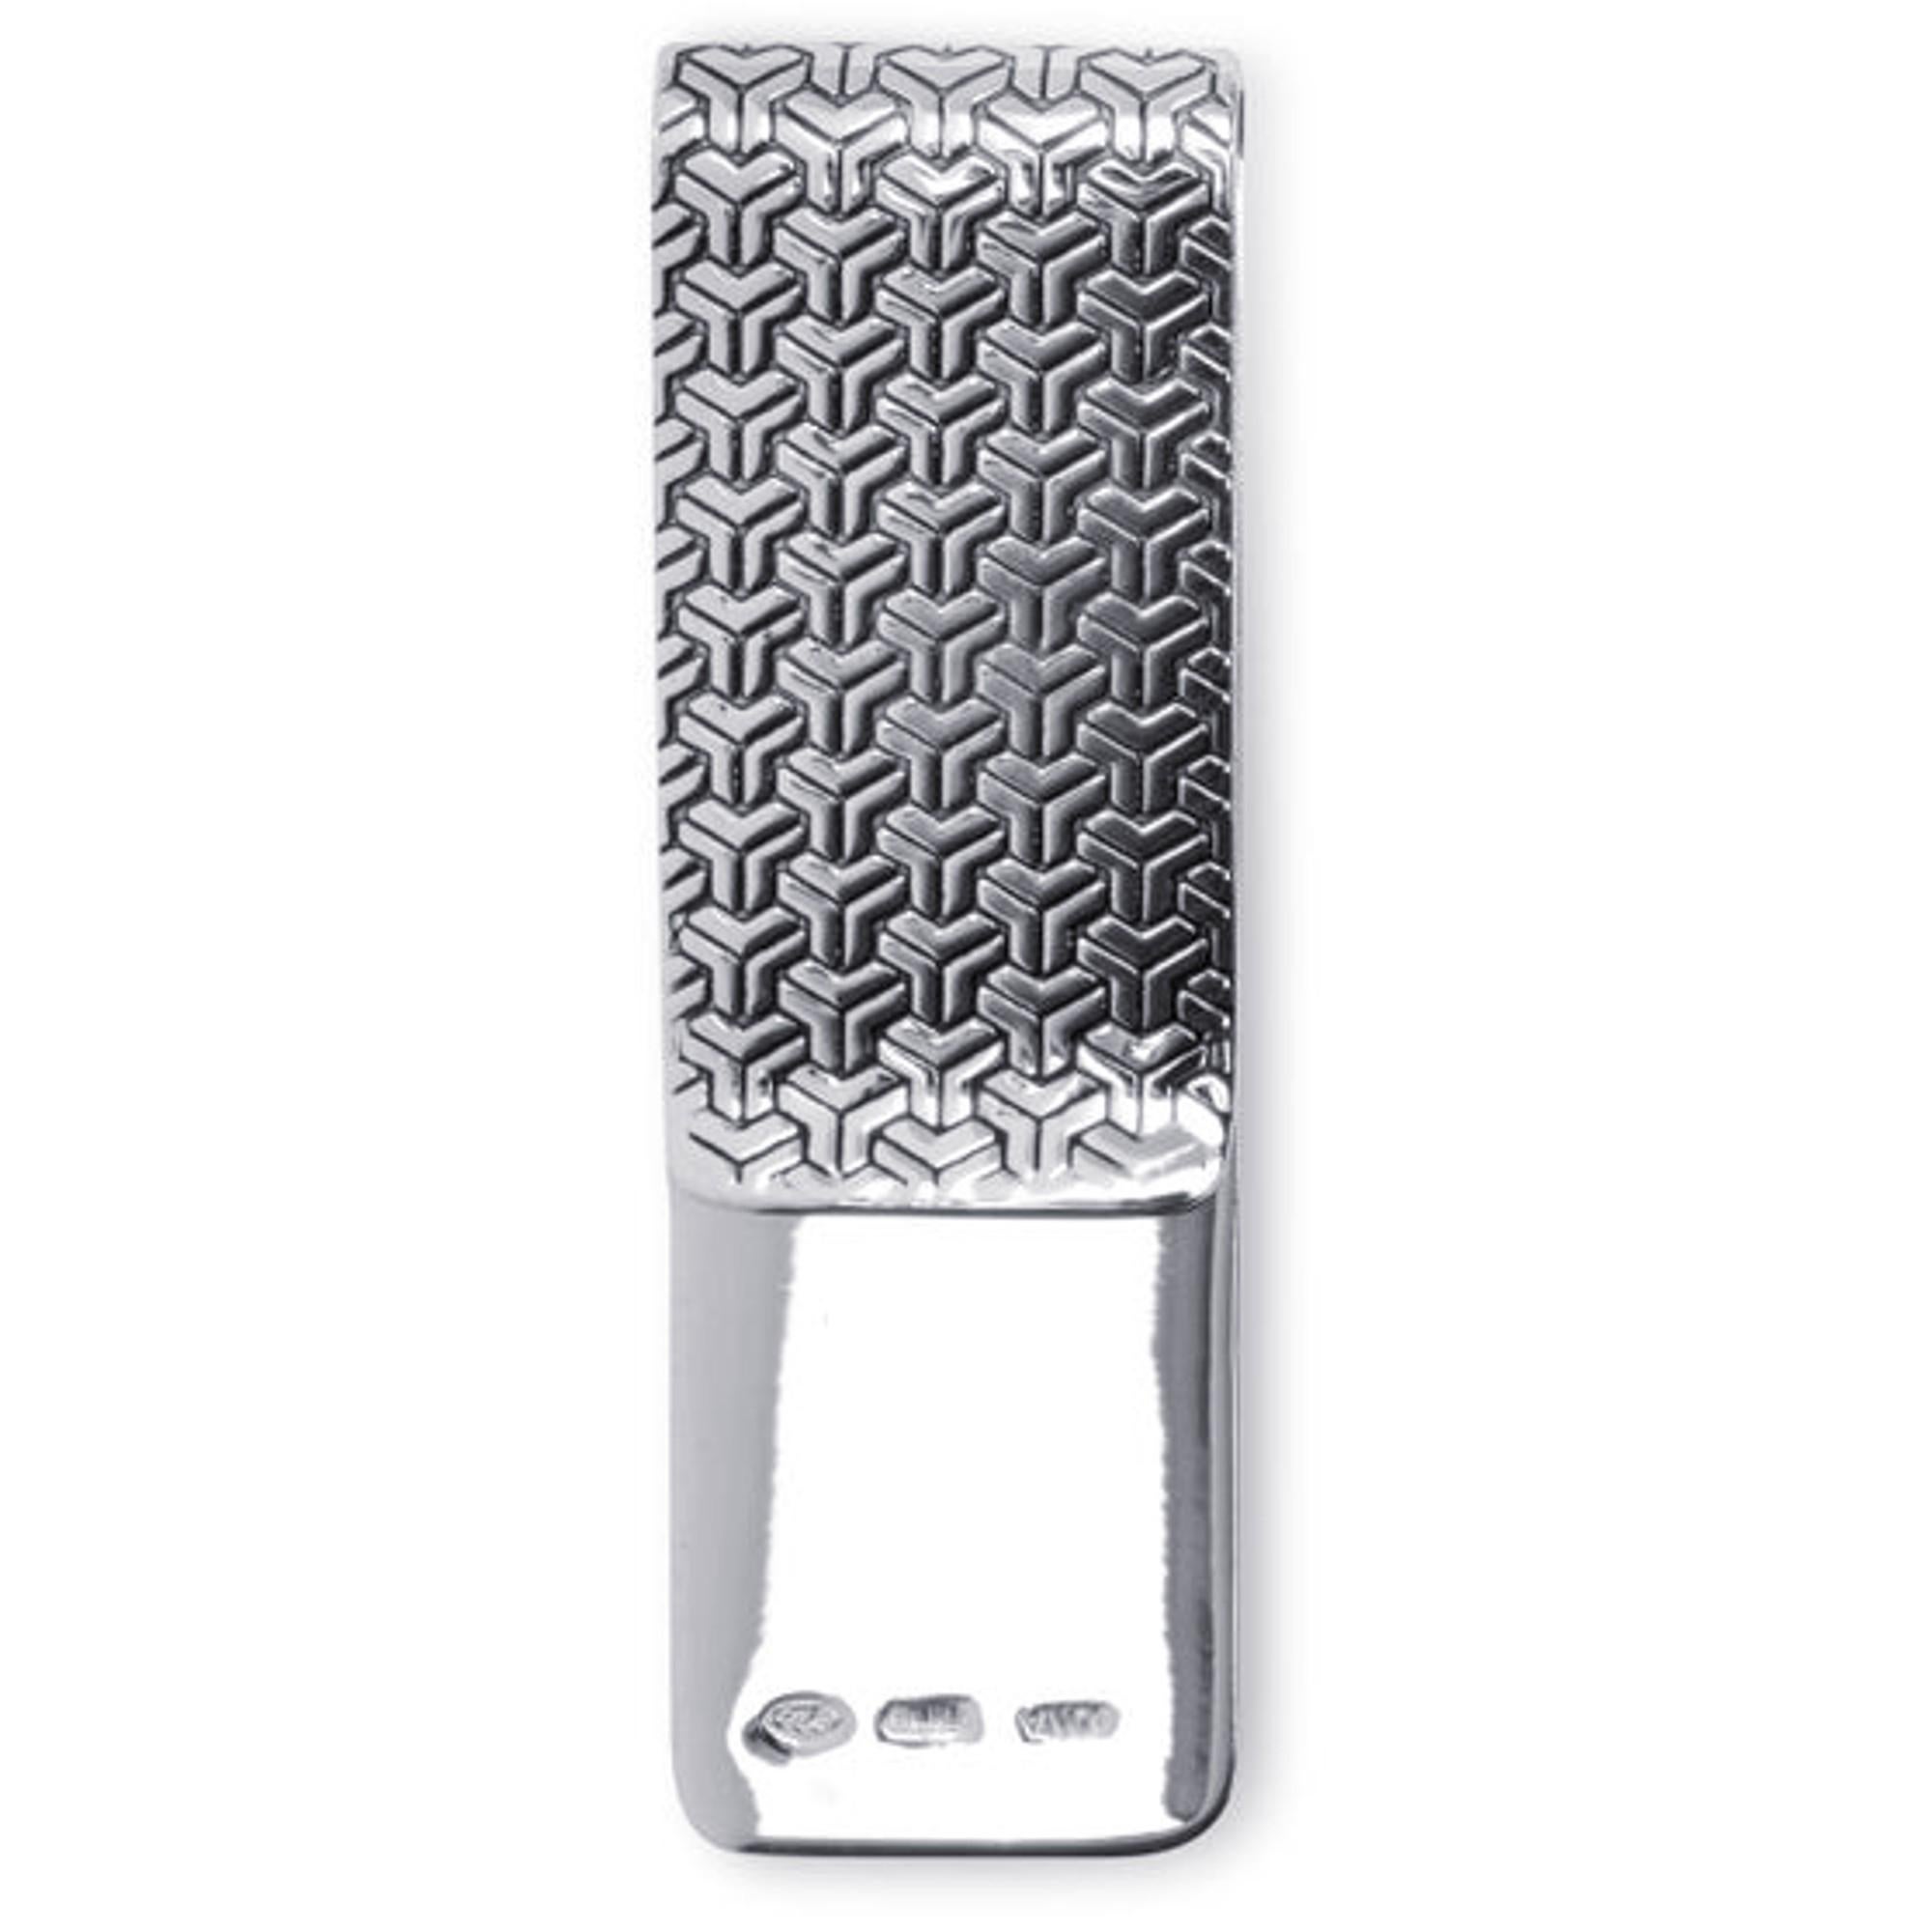 Alex Jona hand crafted in Italy, sterling silver money clip.
Alex Jona gifts stand out, not only for their special design and for the excellent quality, but also for the careful attention given to details during all the manufacturing process. Alex's